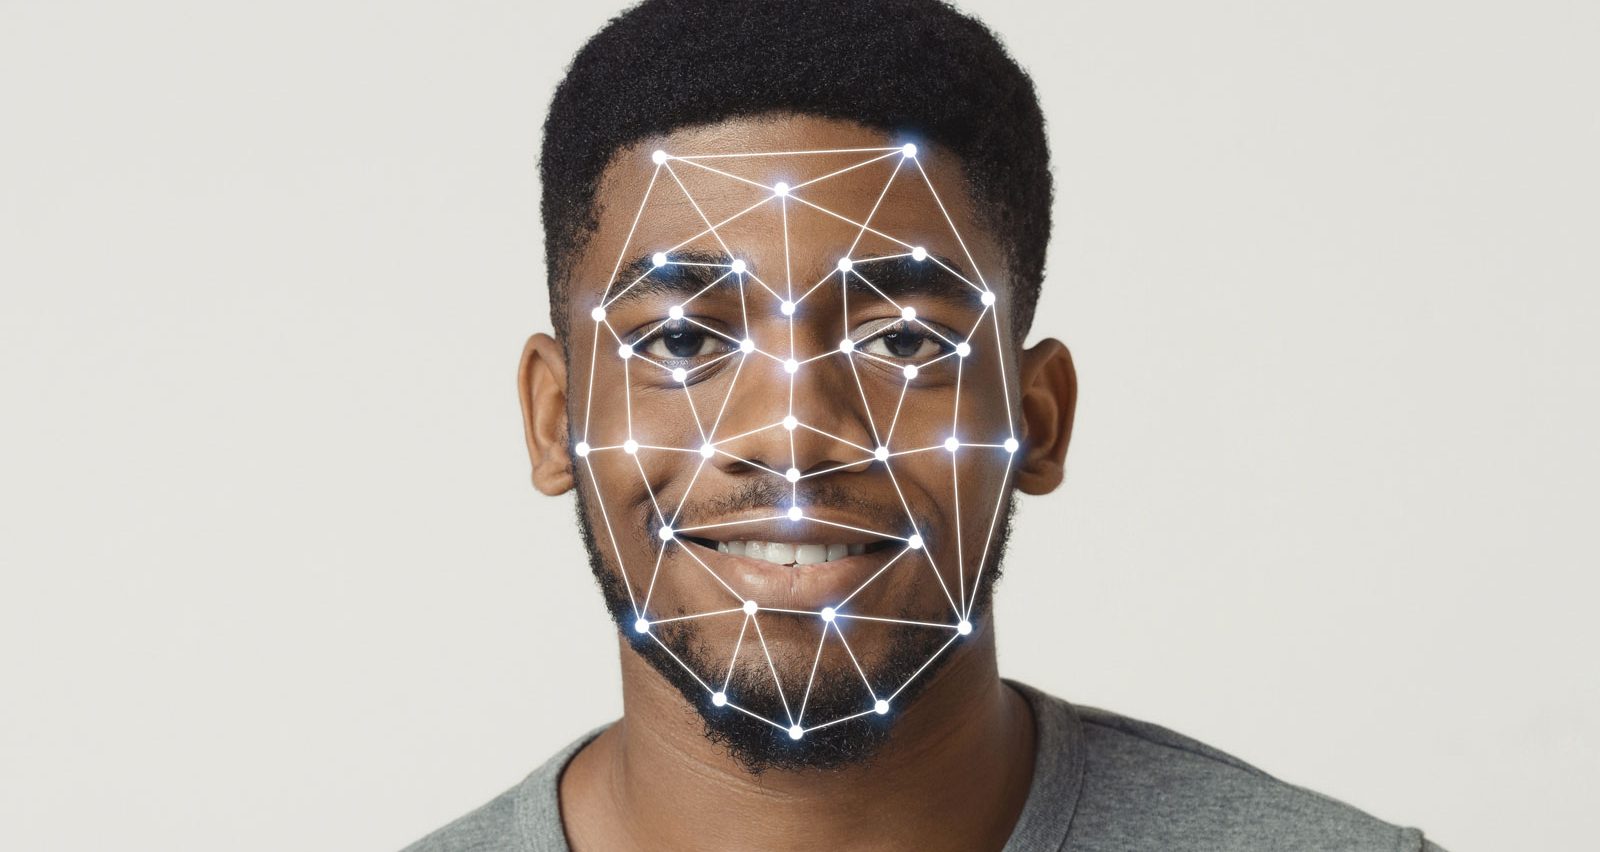 You are currently viewing 6 Benefits to Switching to Facial Biometrics